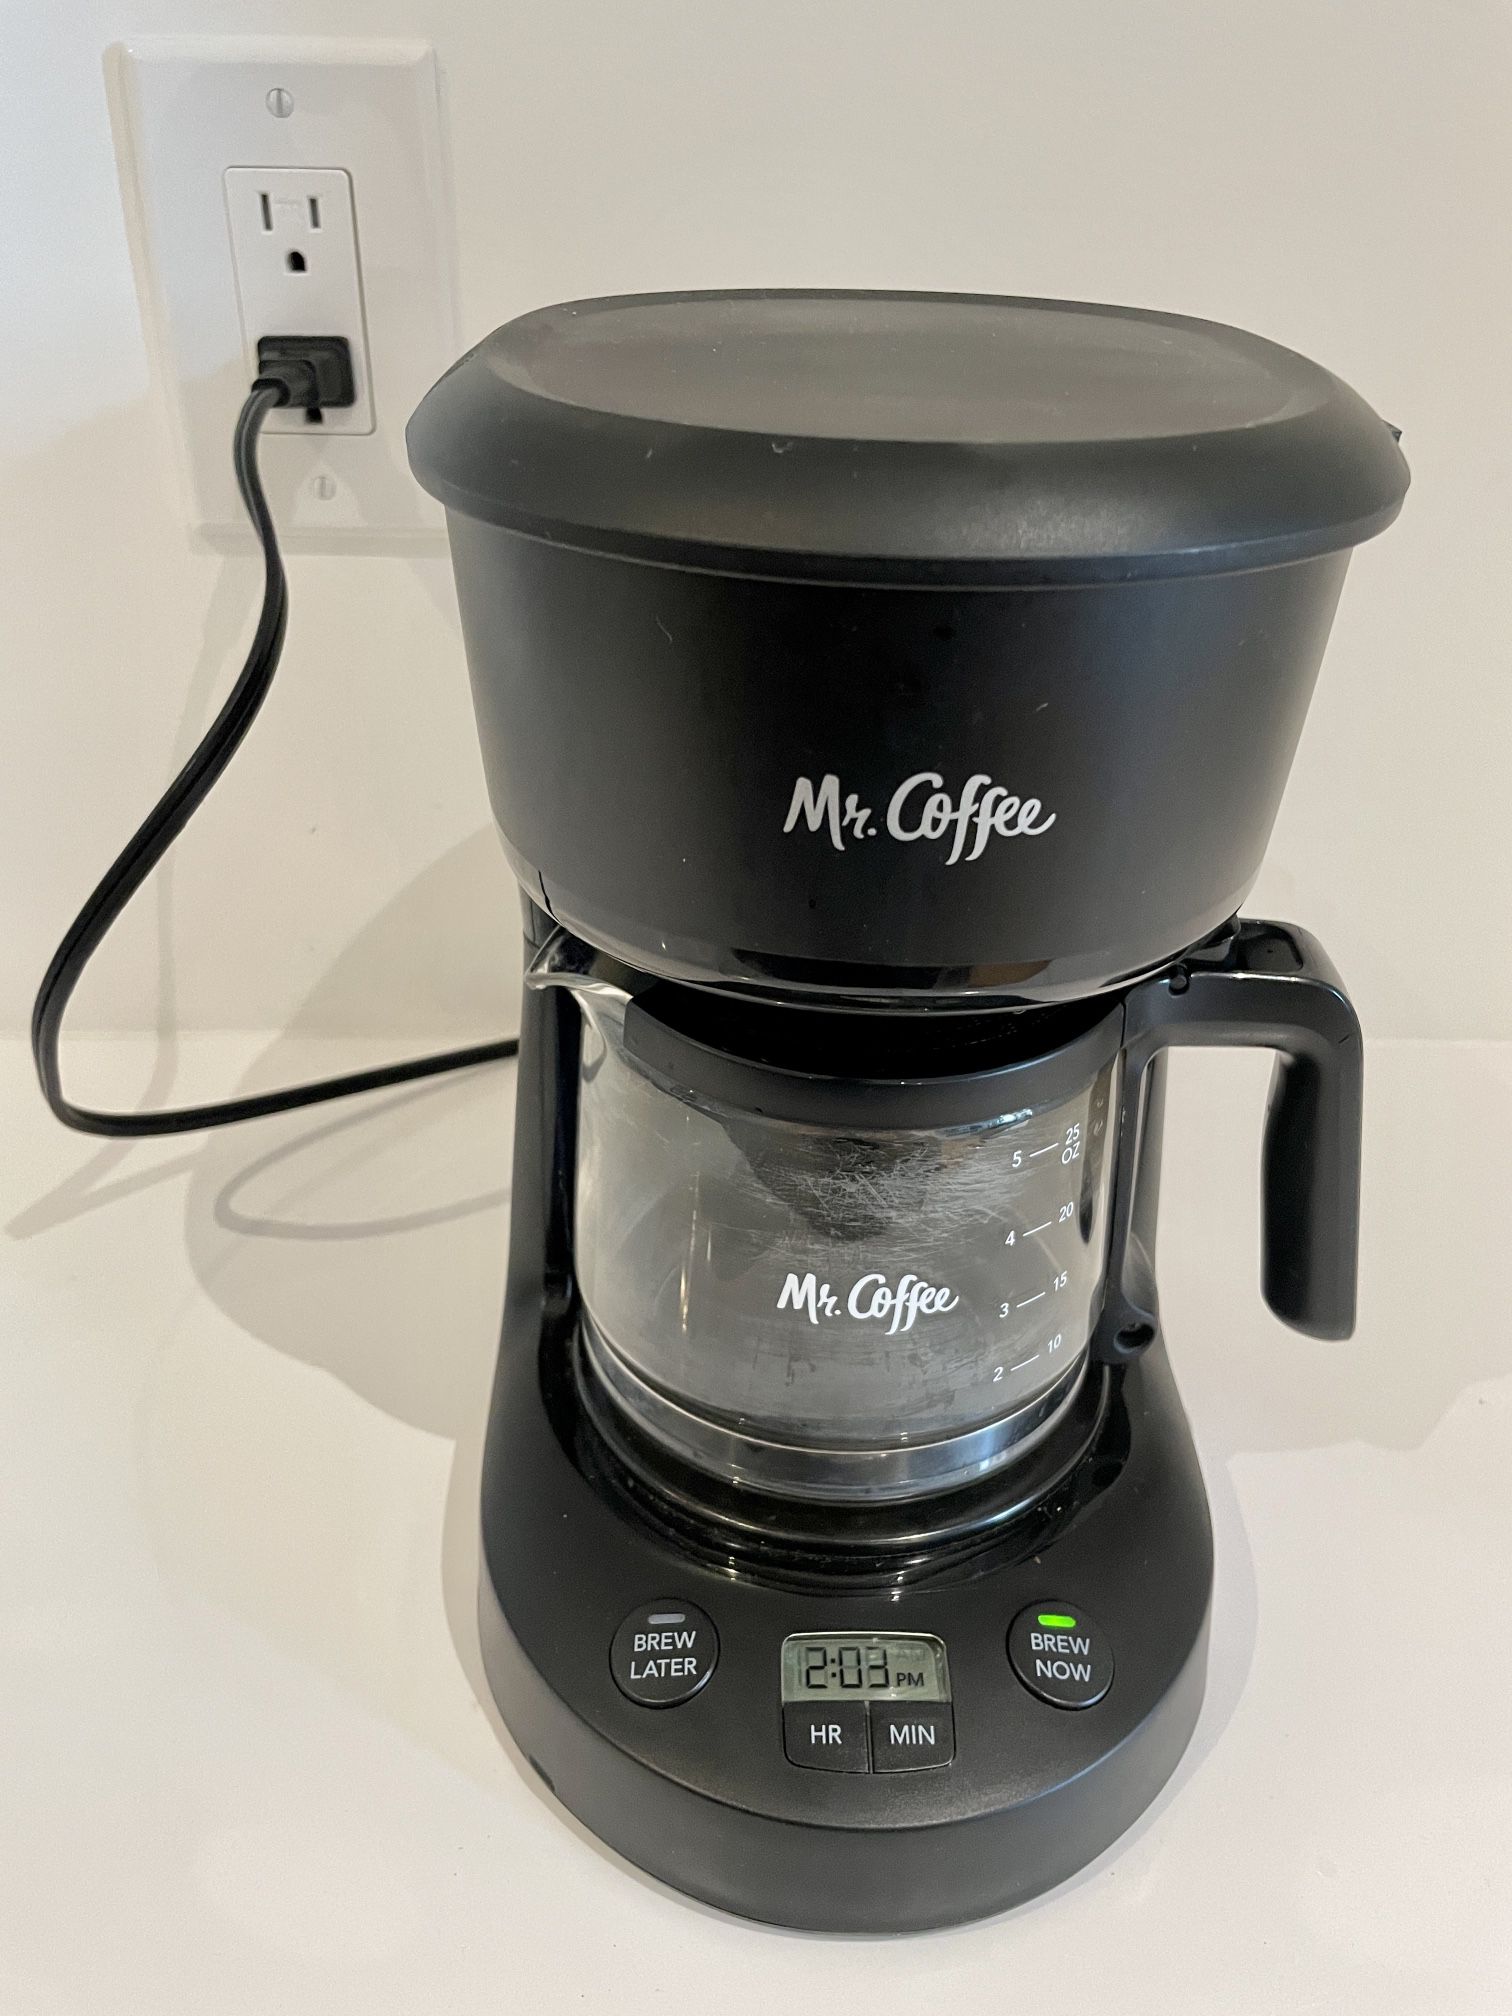 Mr. Coffee 5-Cup Programmable Coffee Maker - 24 oz capacity for